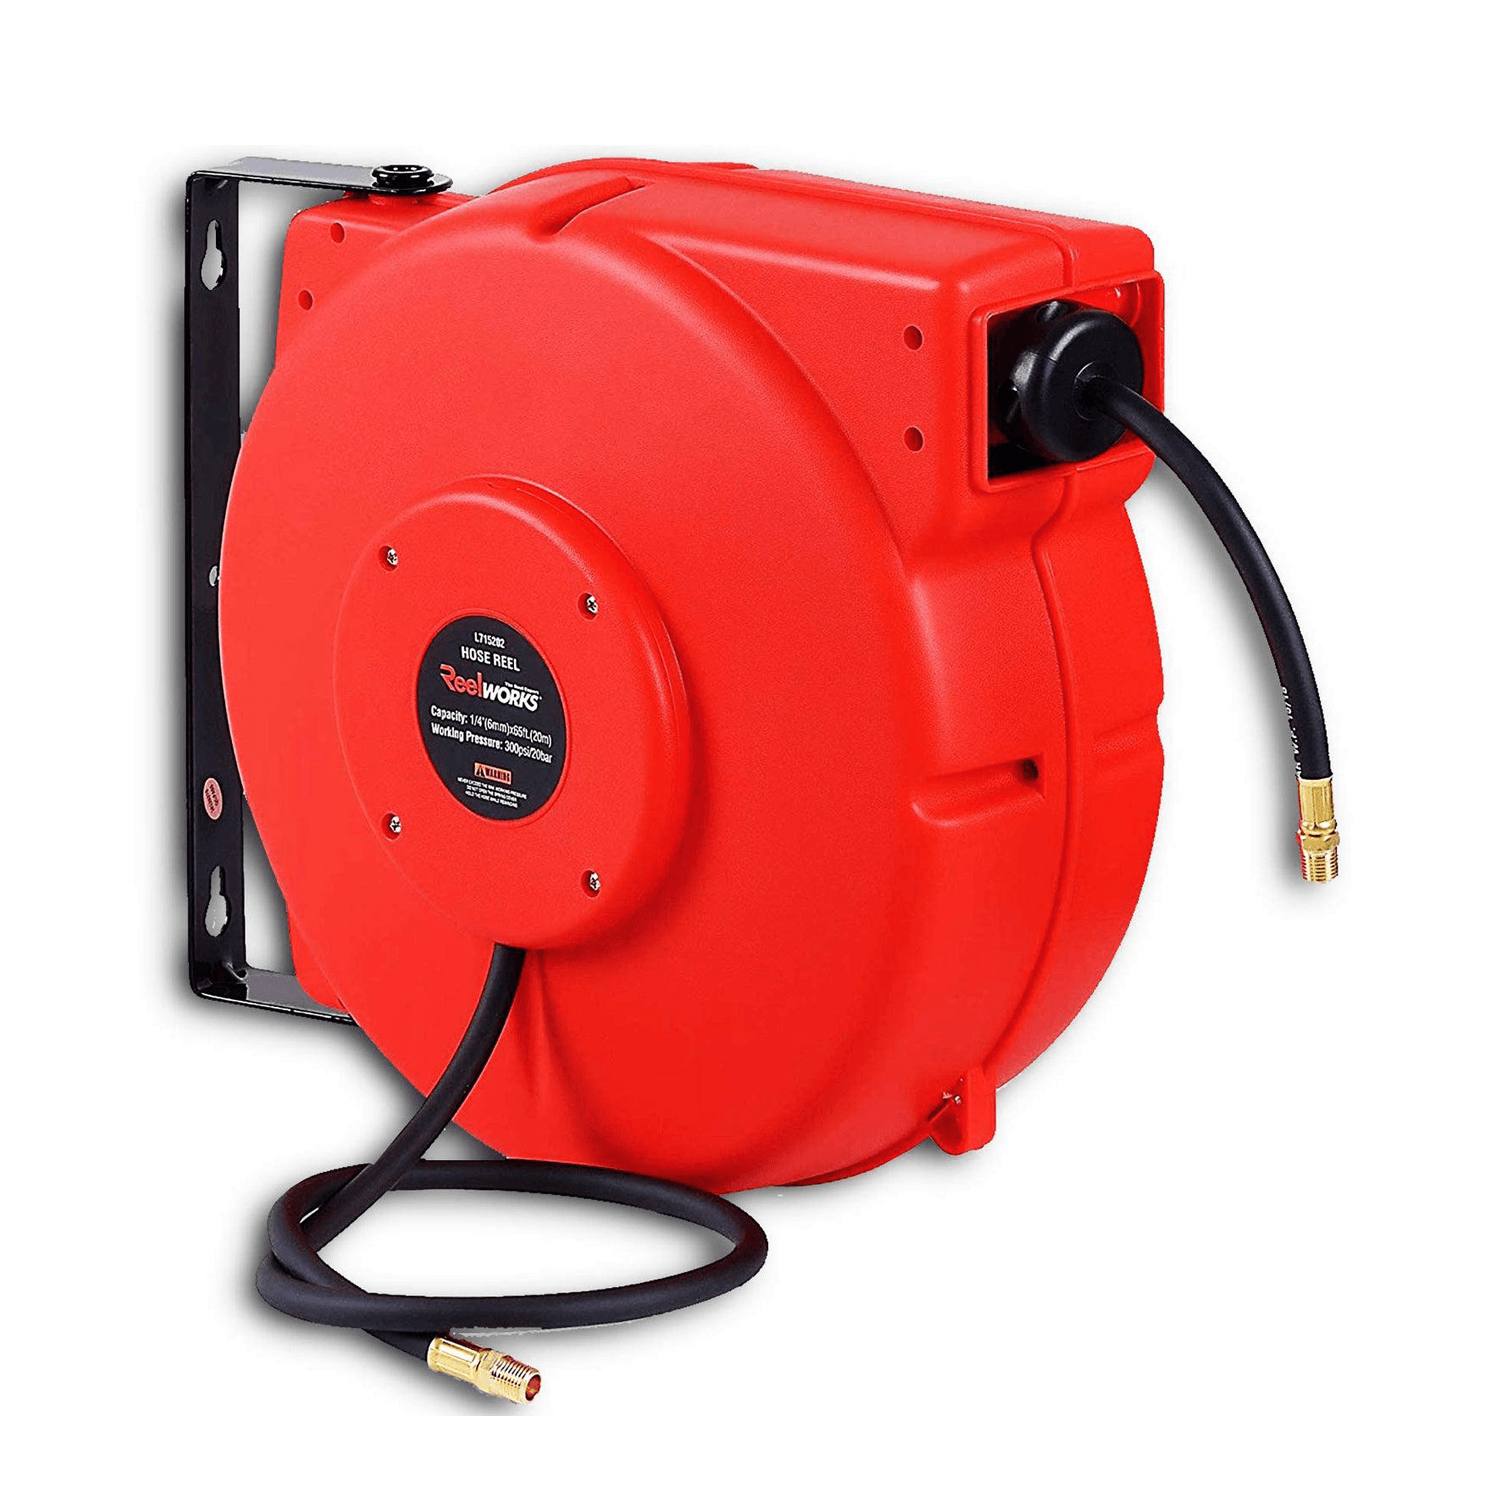 ReelWorks Mountable Retractable Air Hose Reel - 1/4" x  65'FT, 3' Ft Lead-In Hose, 1/4" NPT Connections - DIY Tools by GreatCircleUS